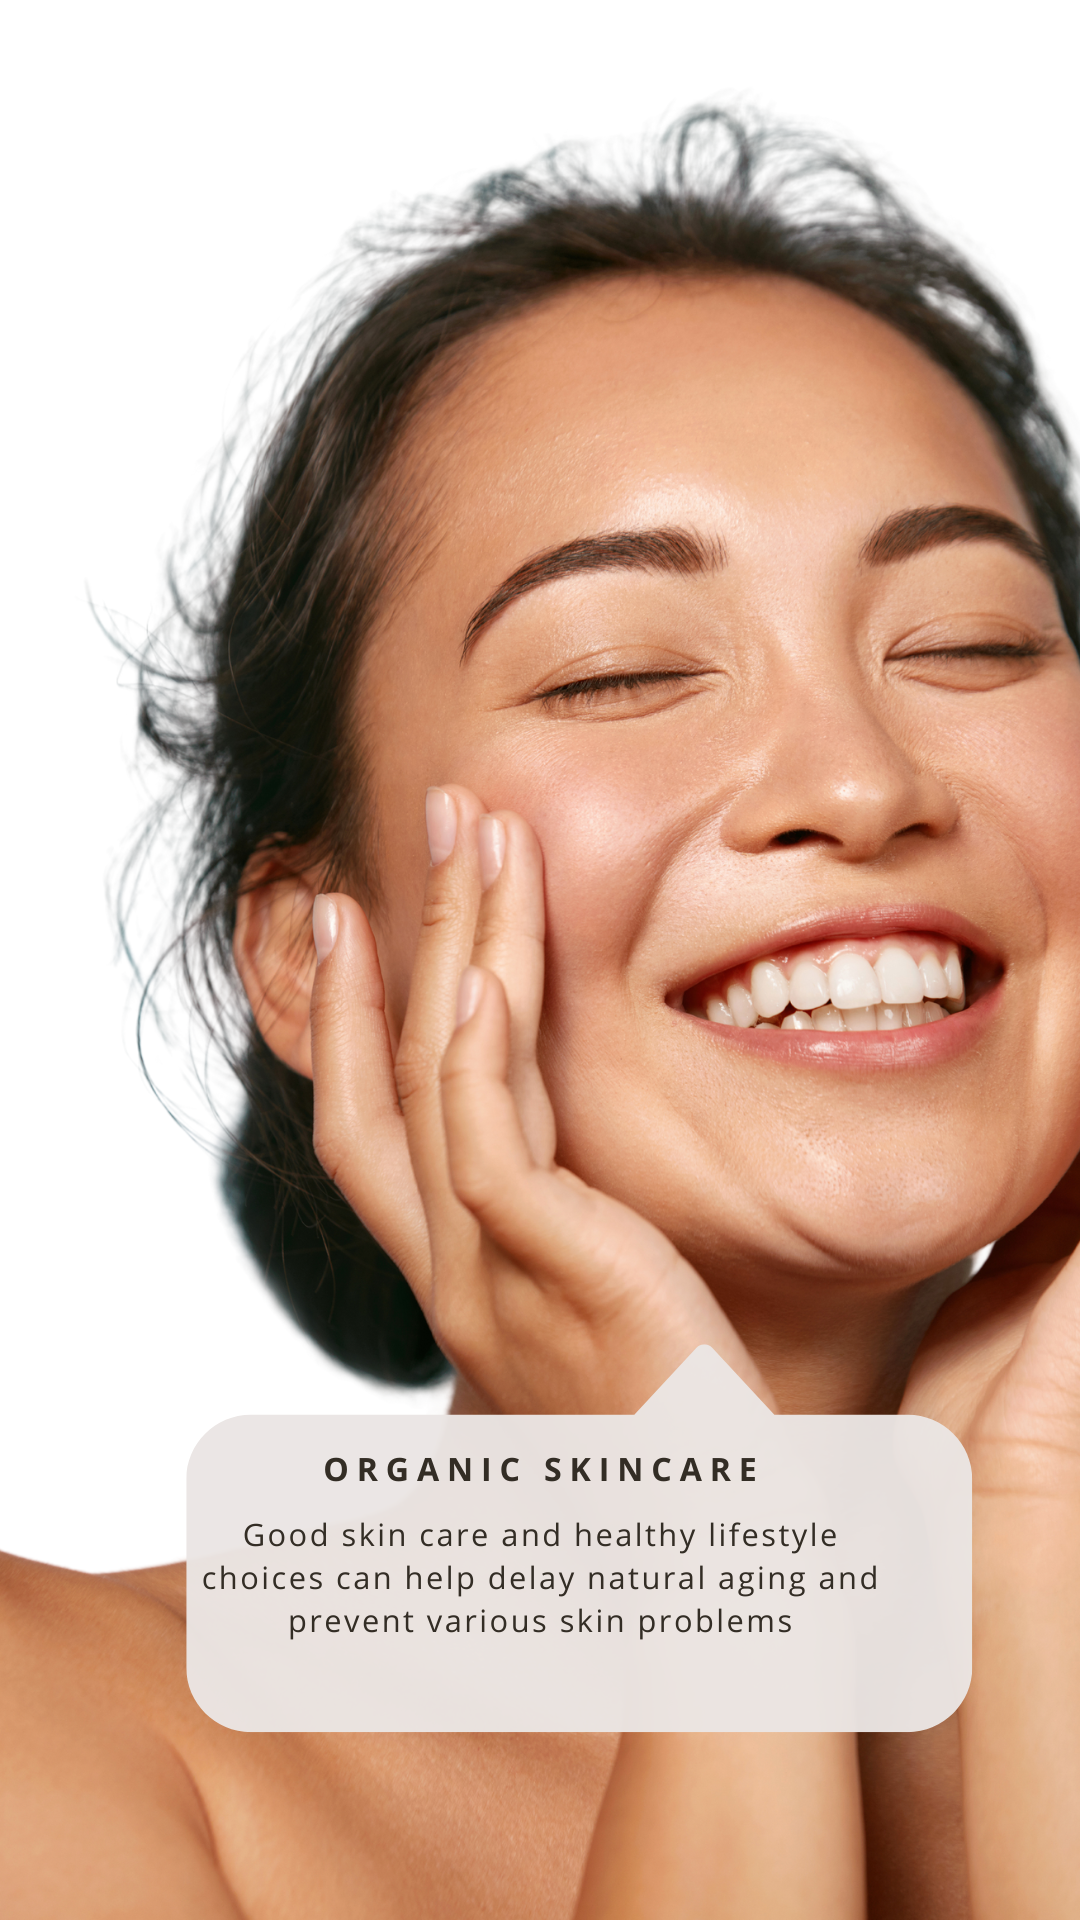 Aesthetic Good Skin Care and Healthy Lifestyle Your Story